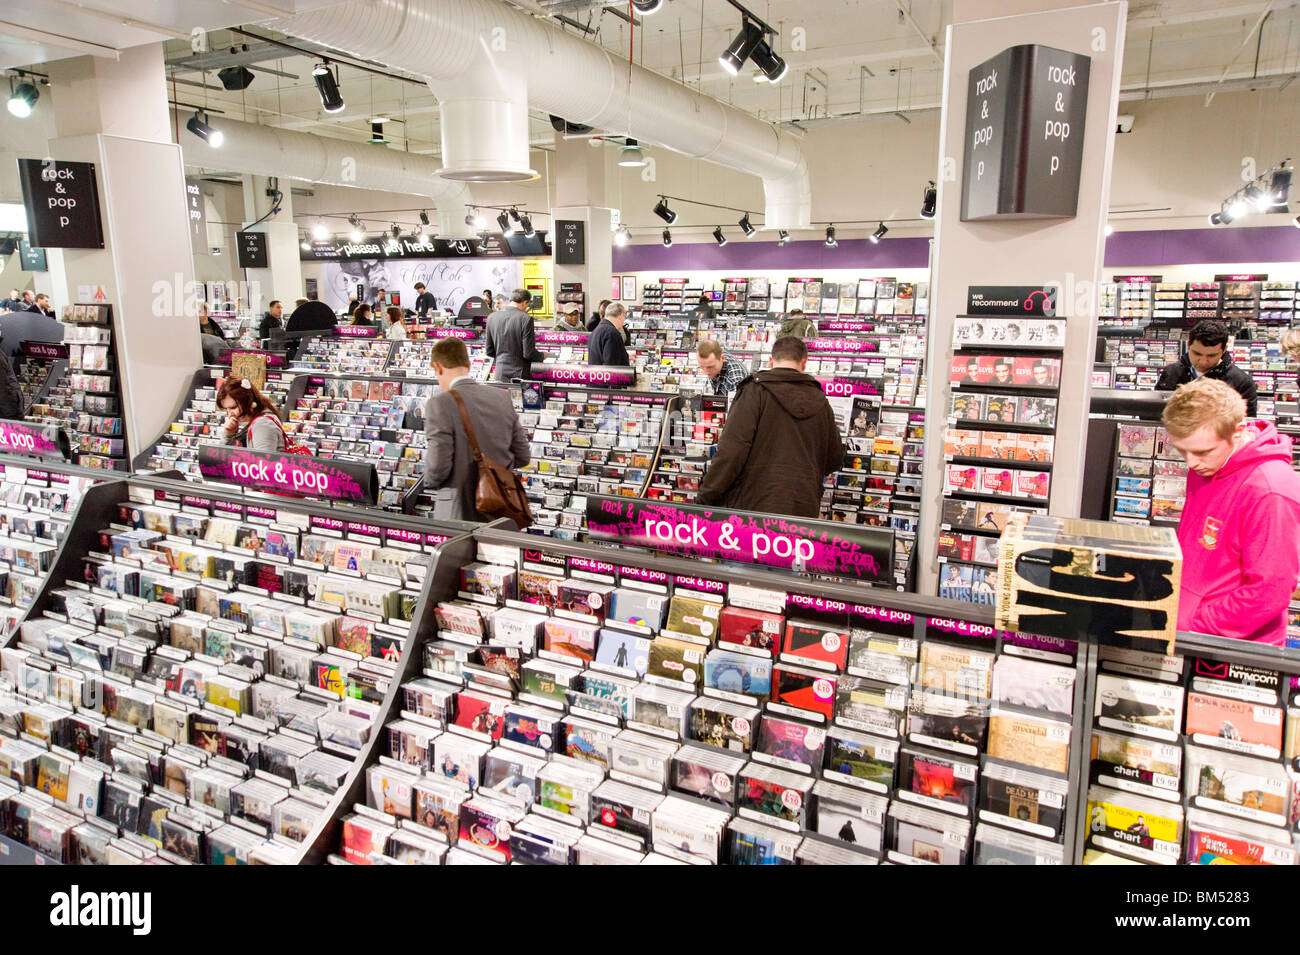 Rows of pop music CDs in HMV record shop, London, England, UK Stock Photo